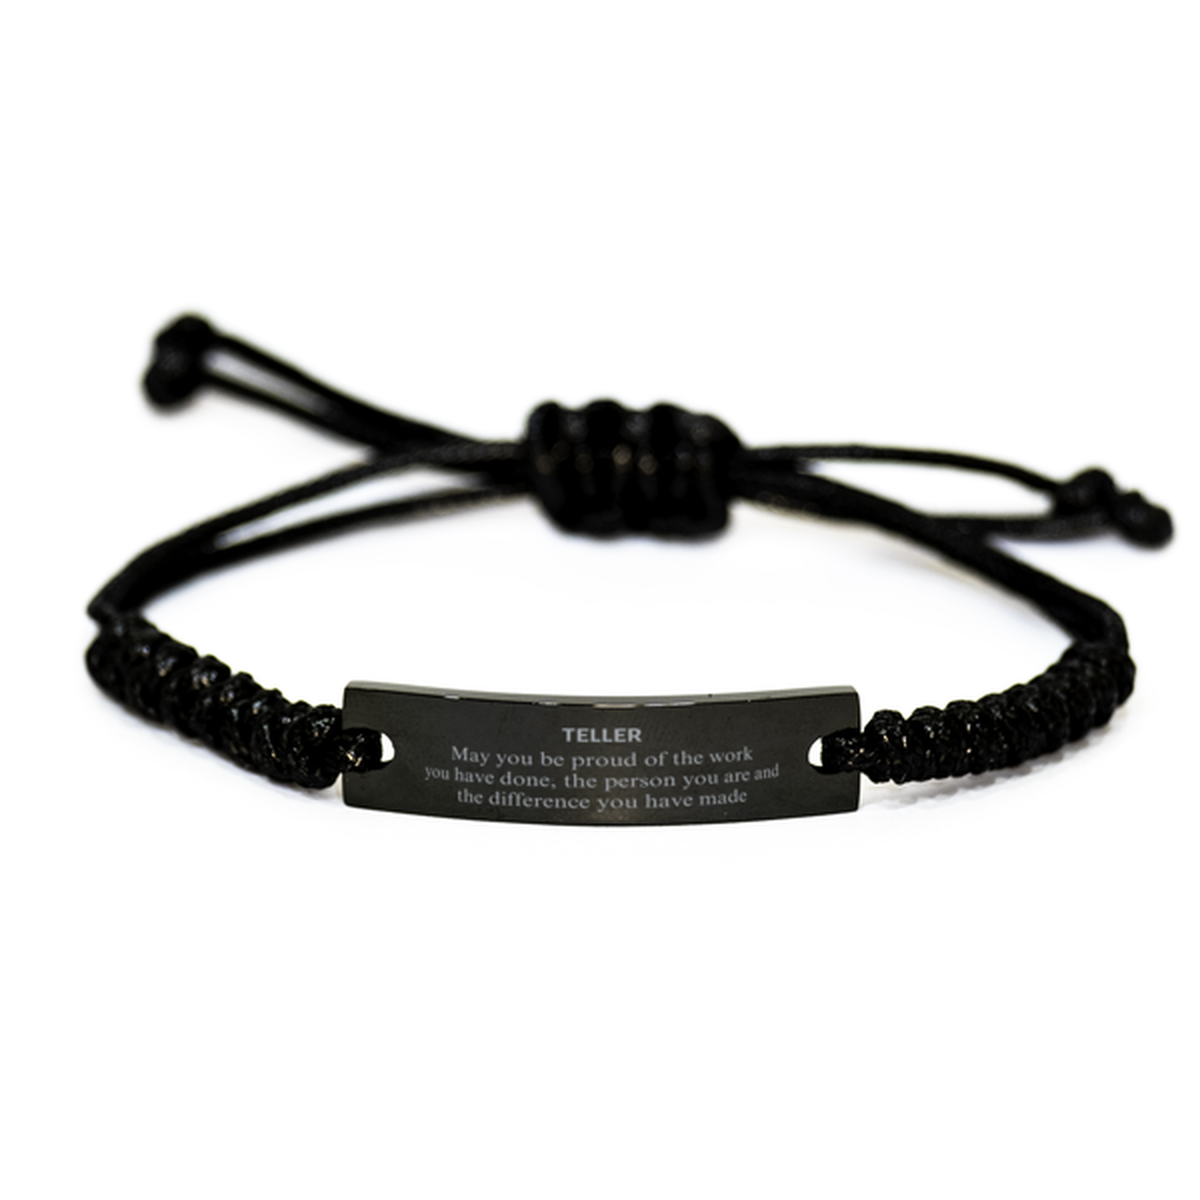 Teller May you be proud of the work you have done, Retirement Teller Black Rope Bracelet for Colleague Appreciation Gifts Amazing for Teller